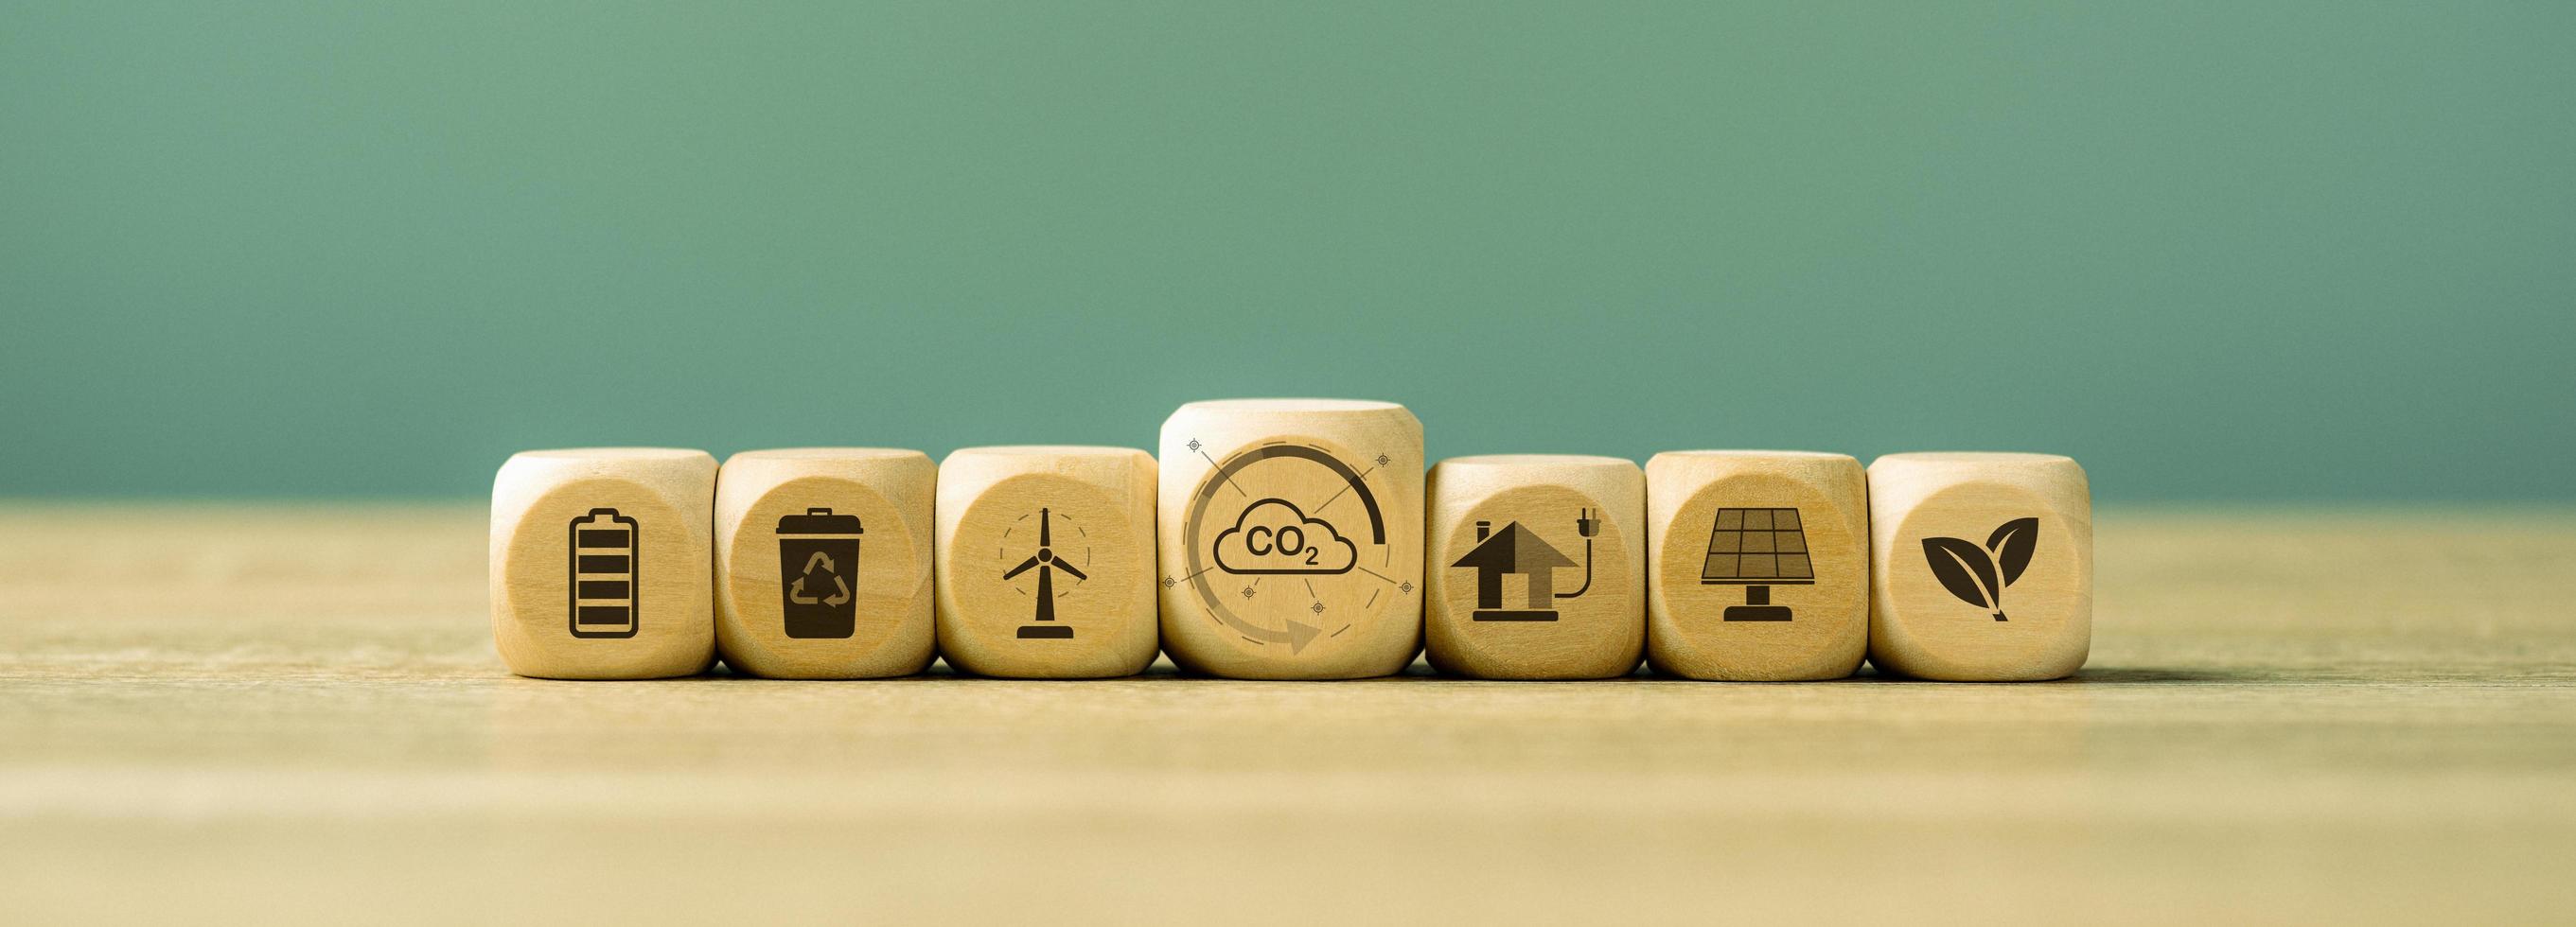 Industrial emissions pollute the environment and ecology. including climate change ,Carbon Reduction Agreement from Renewable Energy Reduce greenhouse gas emissions,wooden cubes arranged on the table photo